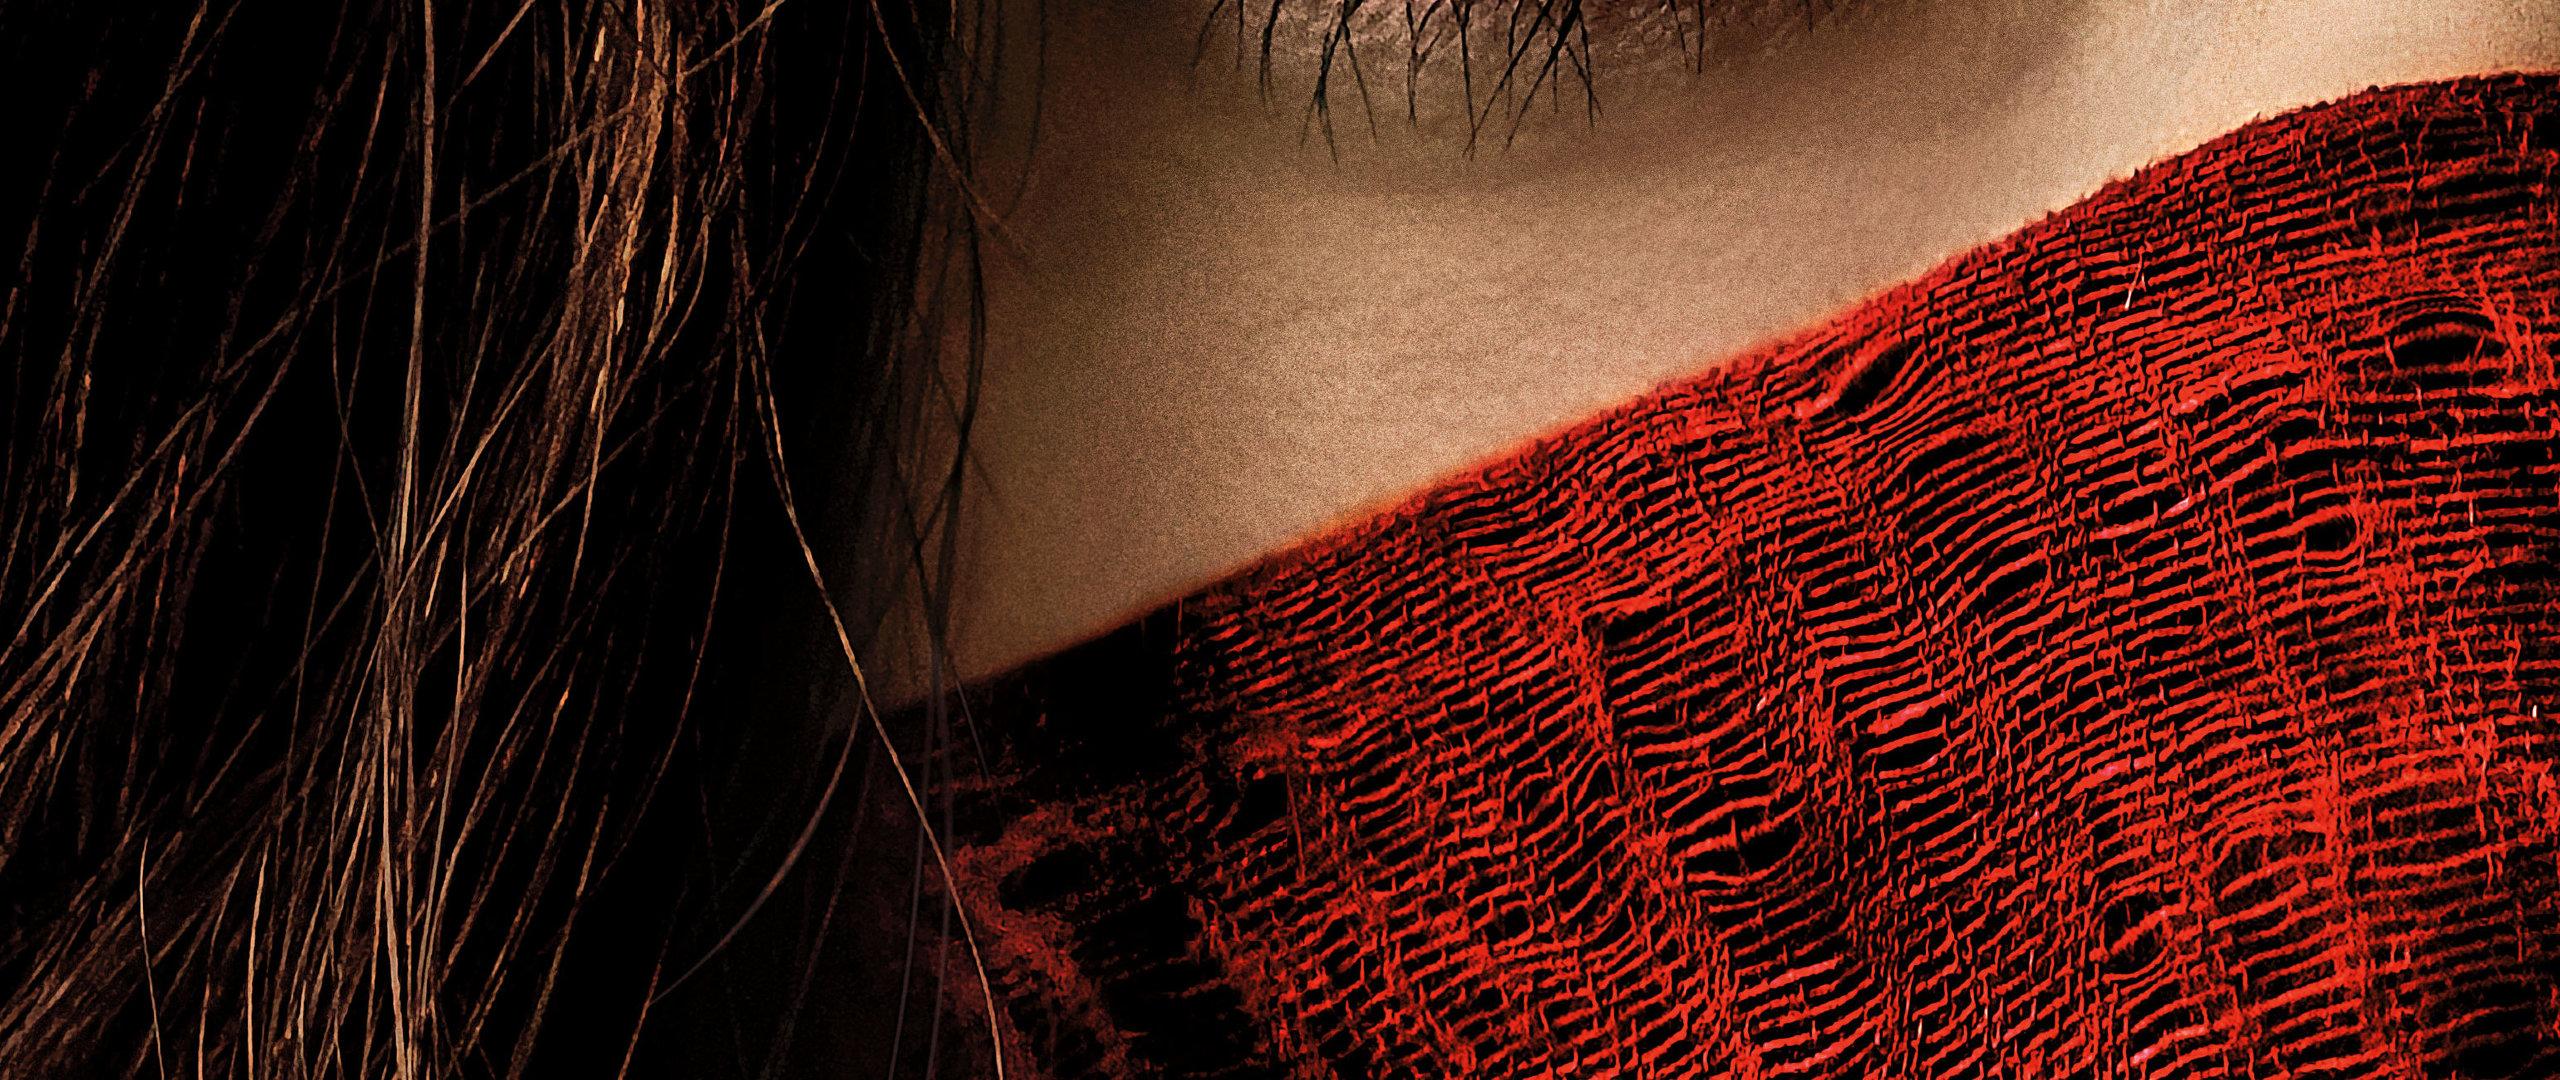 Mortal Engines 2018 Movie First Poster Wallpapers